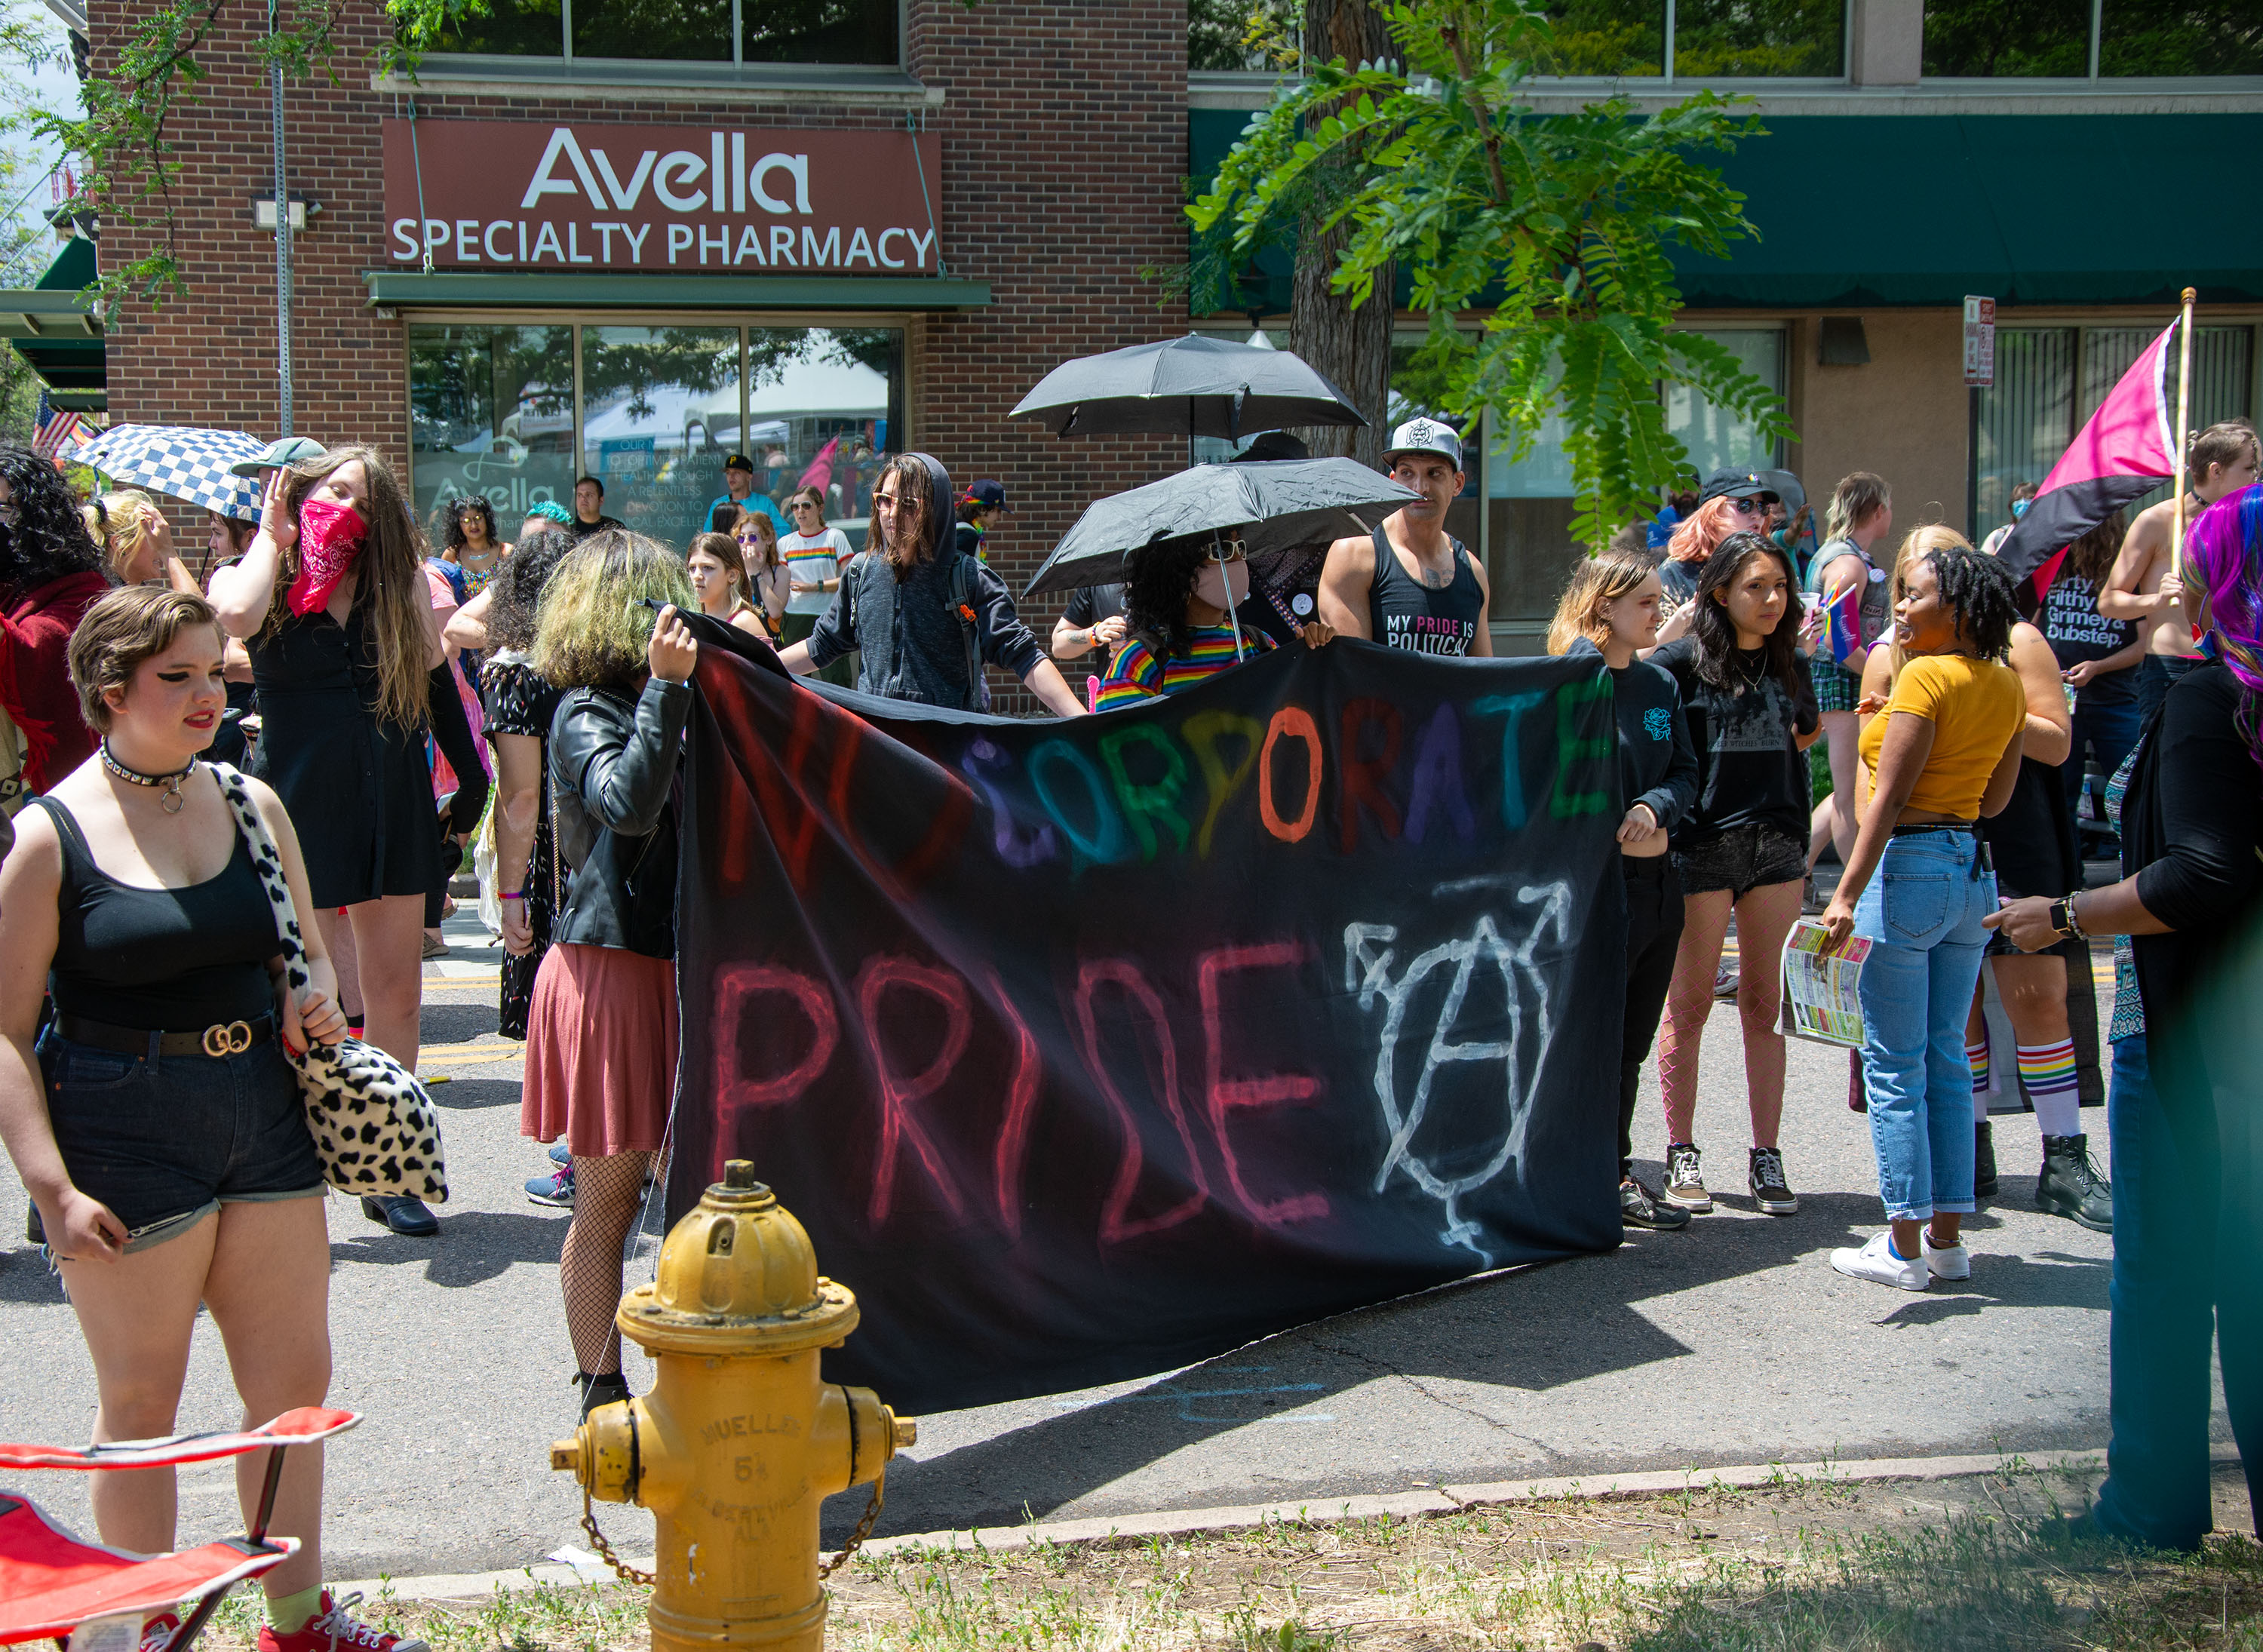 Photo of activists standing in front of a brick building. There is a group of a few dozen people in this image, standing in small groups talking with each other, looking around. A few people in the front carry a sign made of black fabric. The sign says "NO CORPORATE PRIDE" painted in colorful letters, and a large transgender symbol (a pictogram consisting of a circle with an arrow sprouting from the top-right side, a cross at the bottom, and a stroked arrow at the top) painted in white in the lower corner.